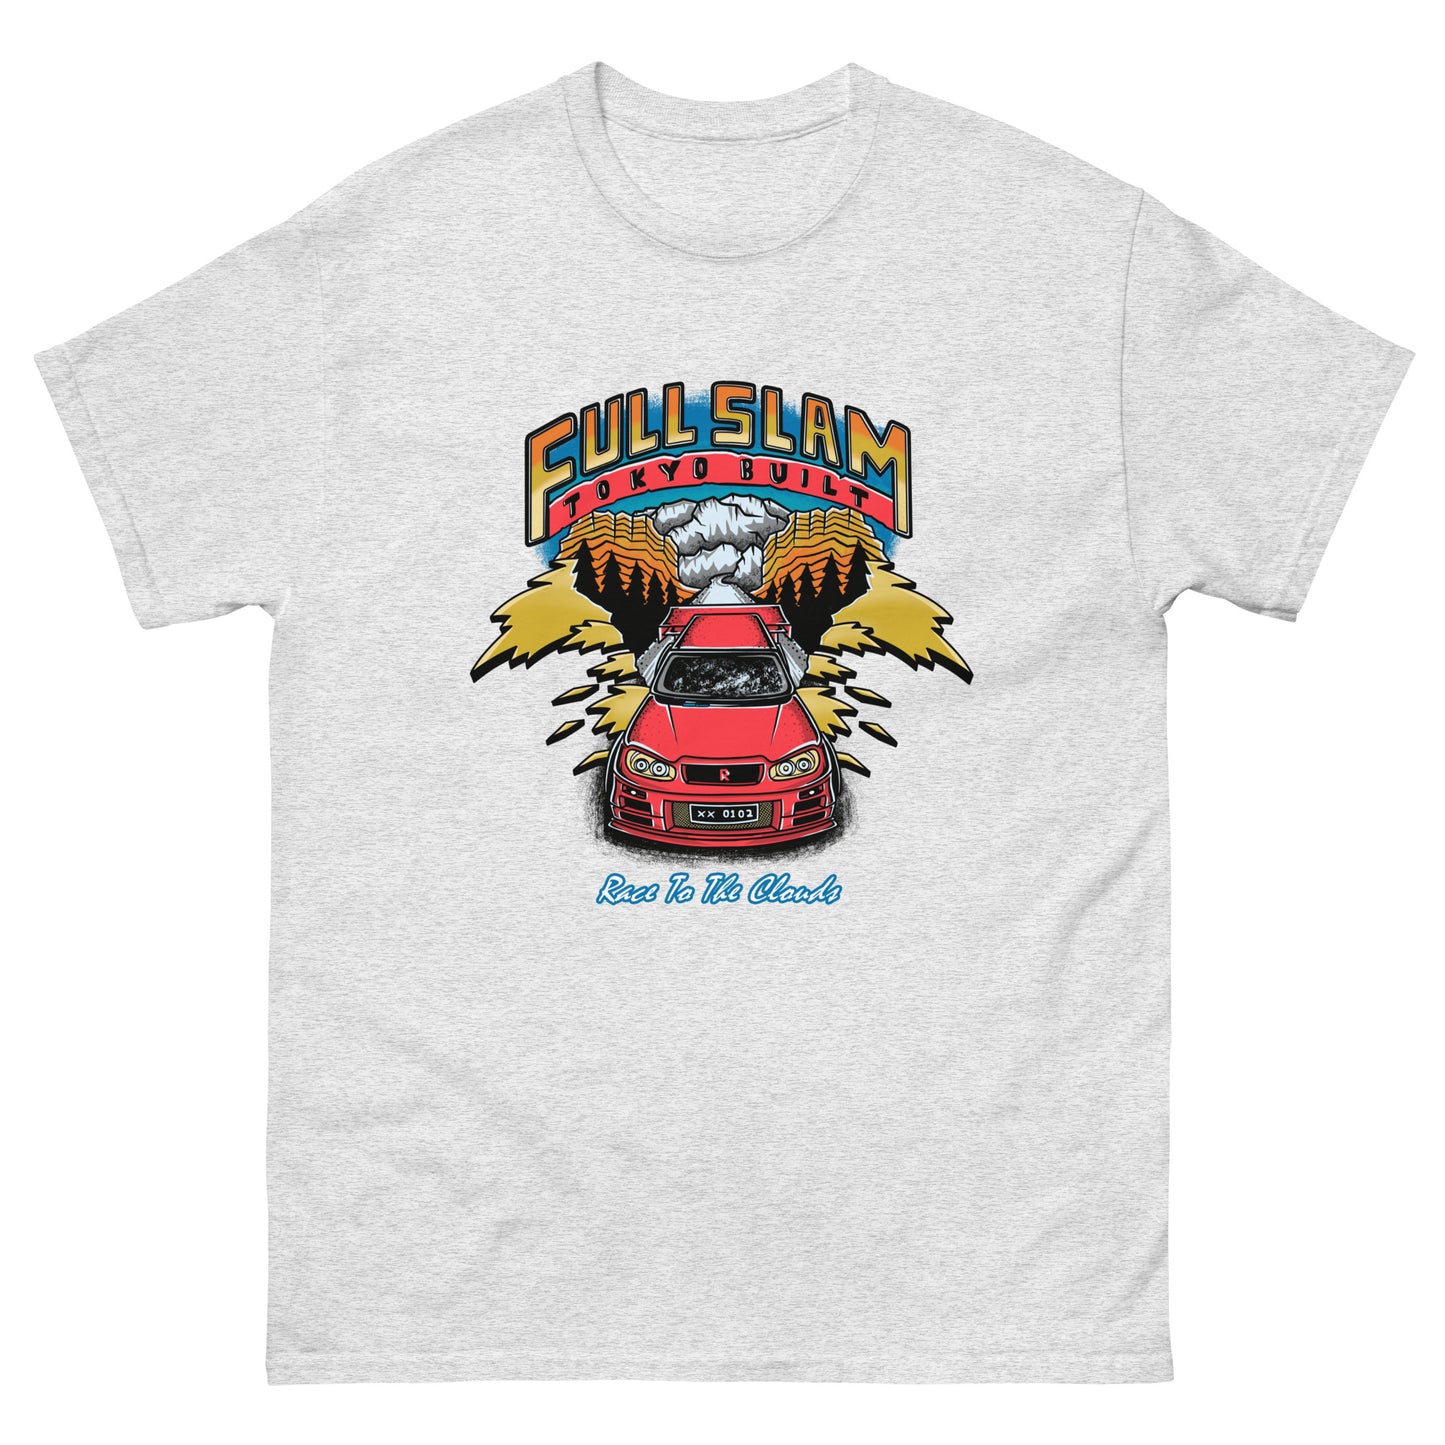 Race to the Clouds Tee